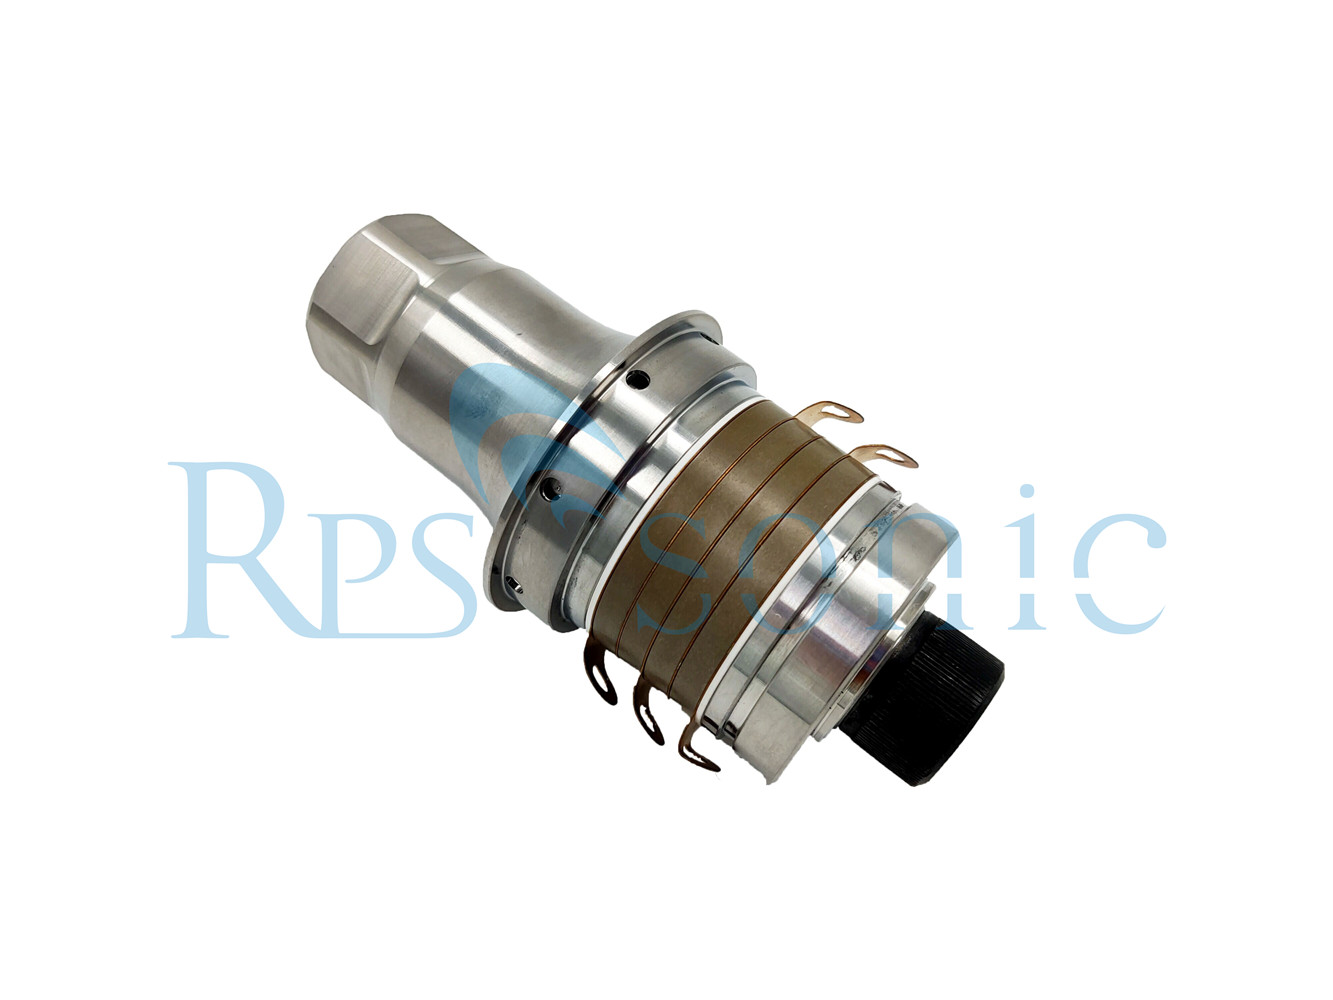 20Khz Anti-Static Welding Transducer Herrmann CCS20-S-IP50-L-I 20 for Automation Equipment